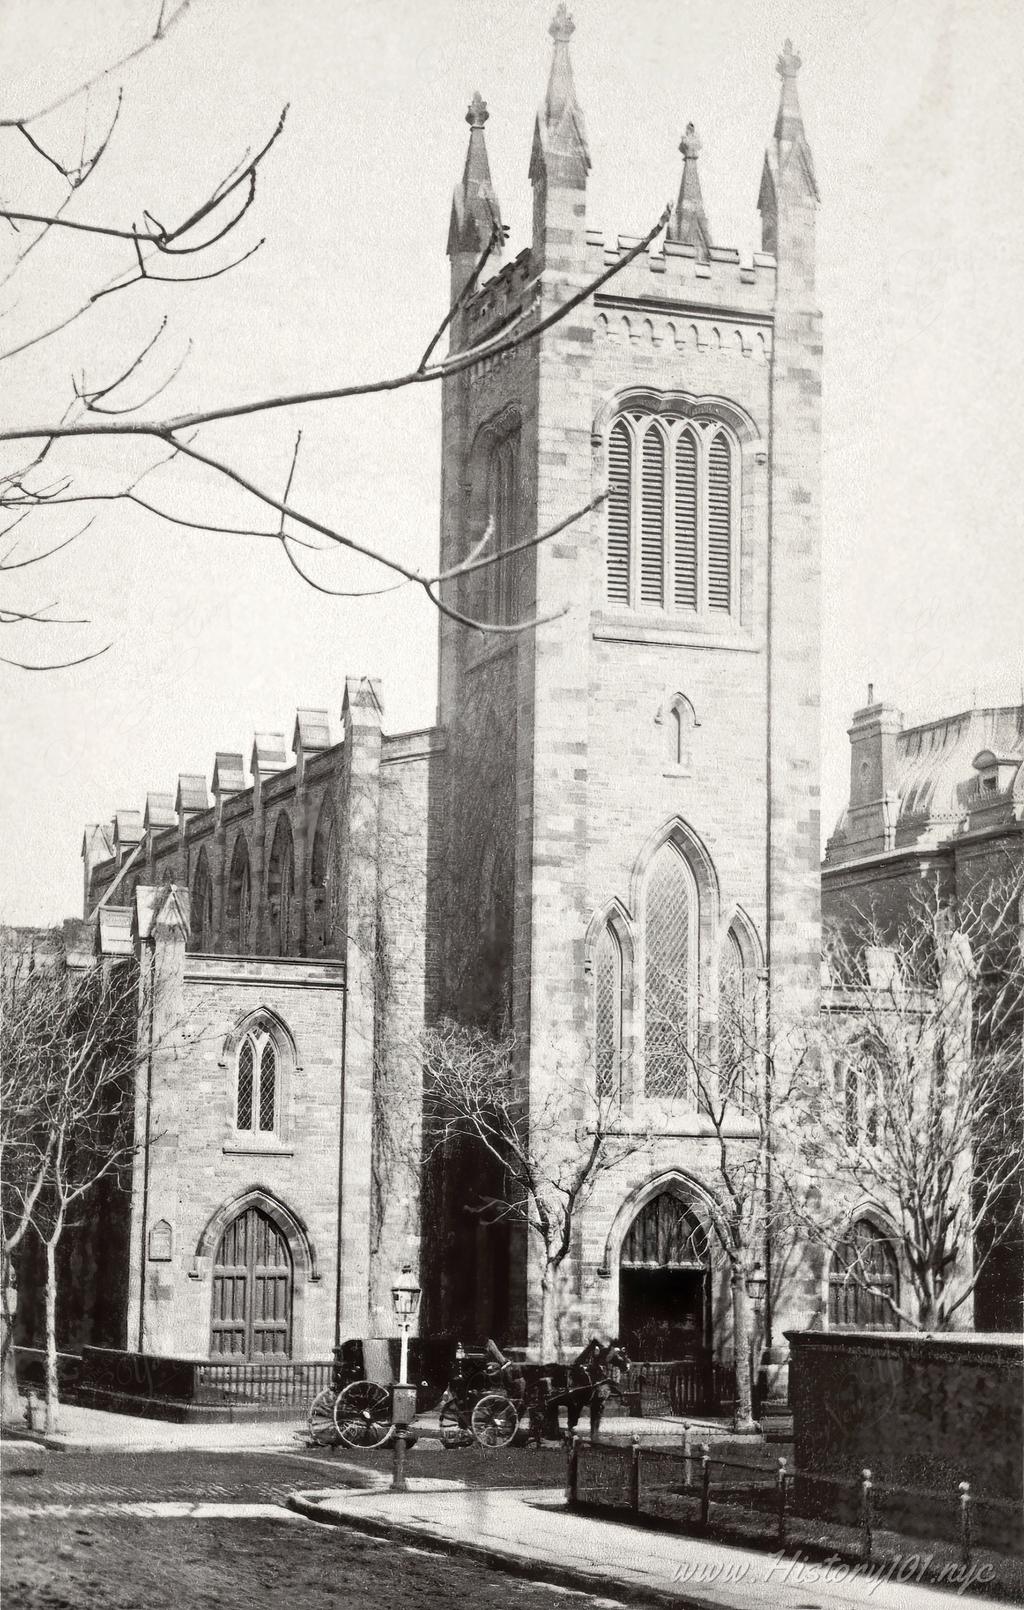 The Church of the Ascension is an Episcopal church in the Diocese of New York. It was completed in 1840-41, the first church to be built on Fifth Avenue.